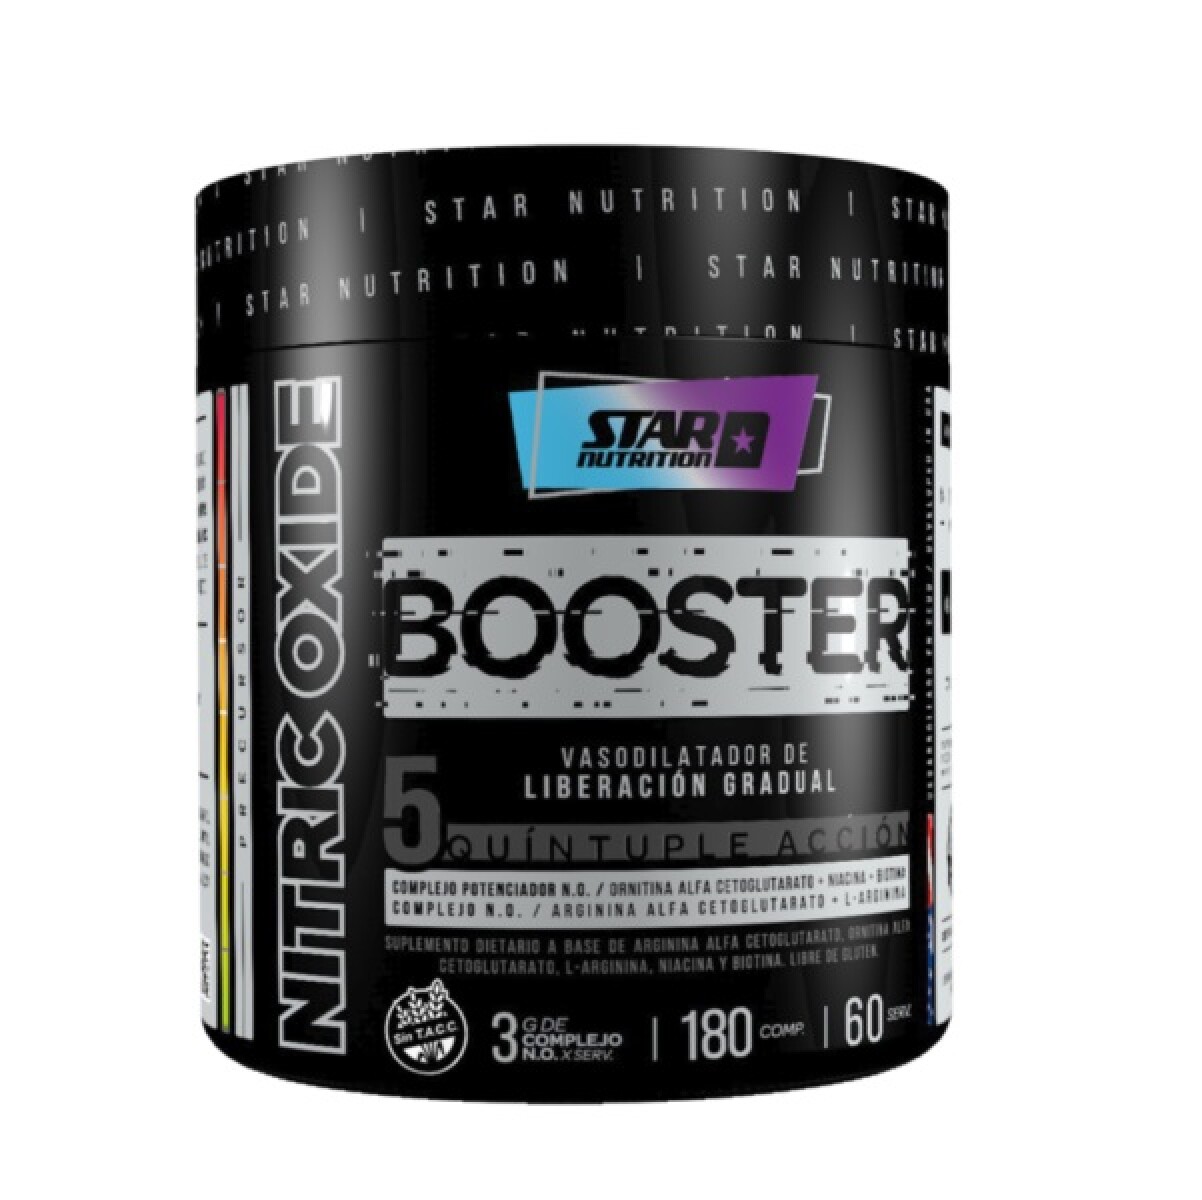 Hardcore N.o. Booster Star Nutrition 180 Comp. 